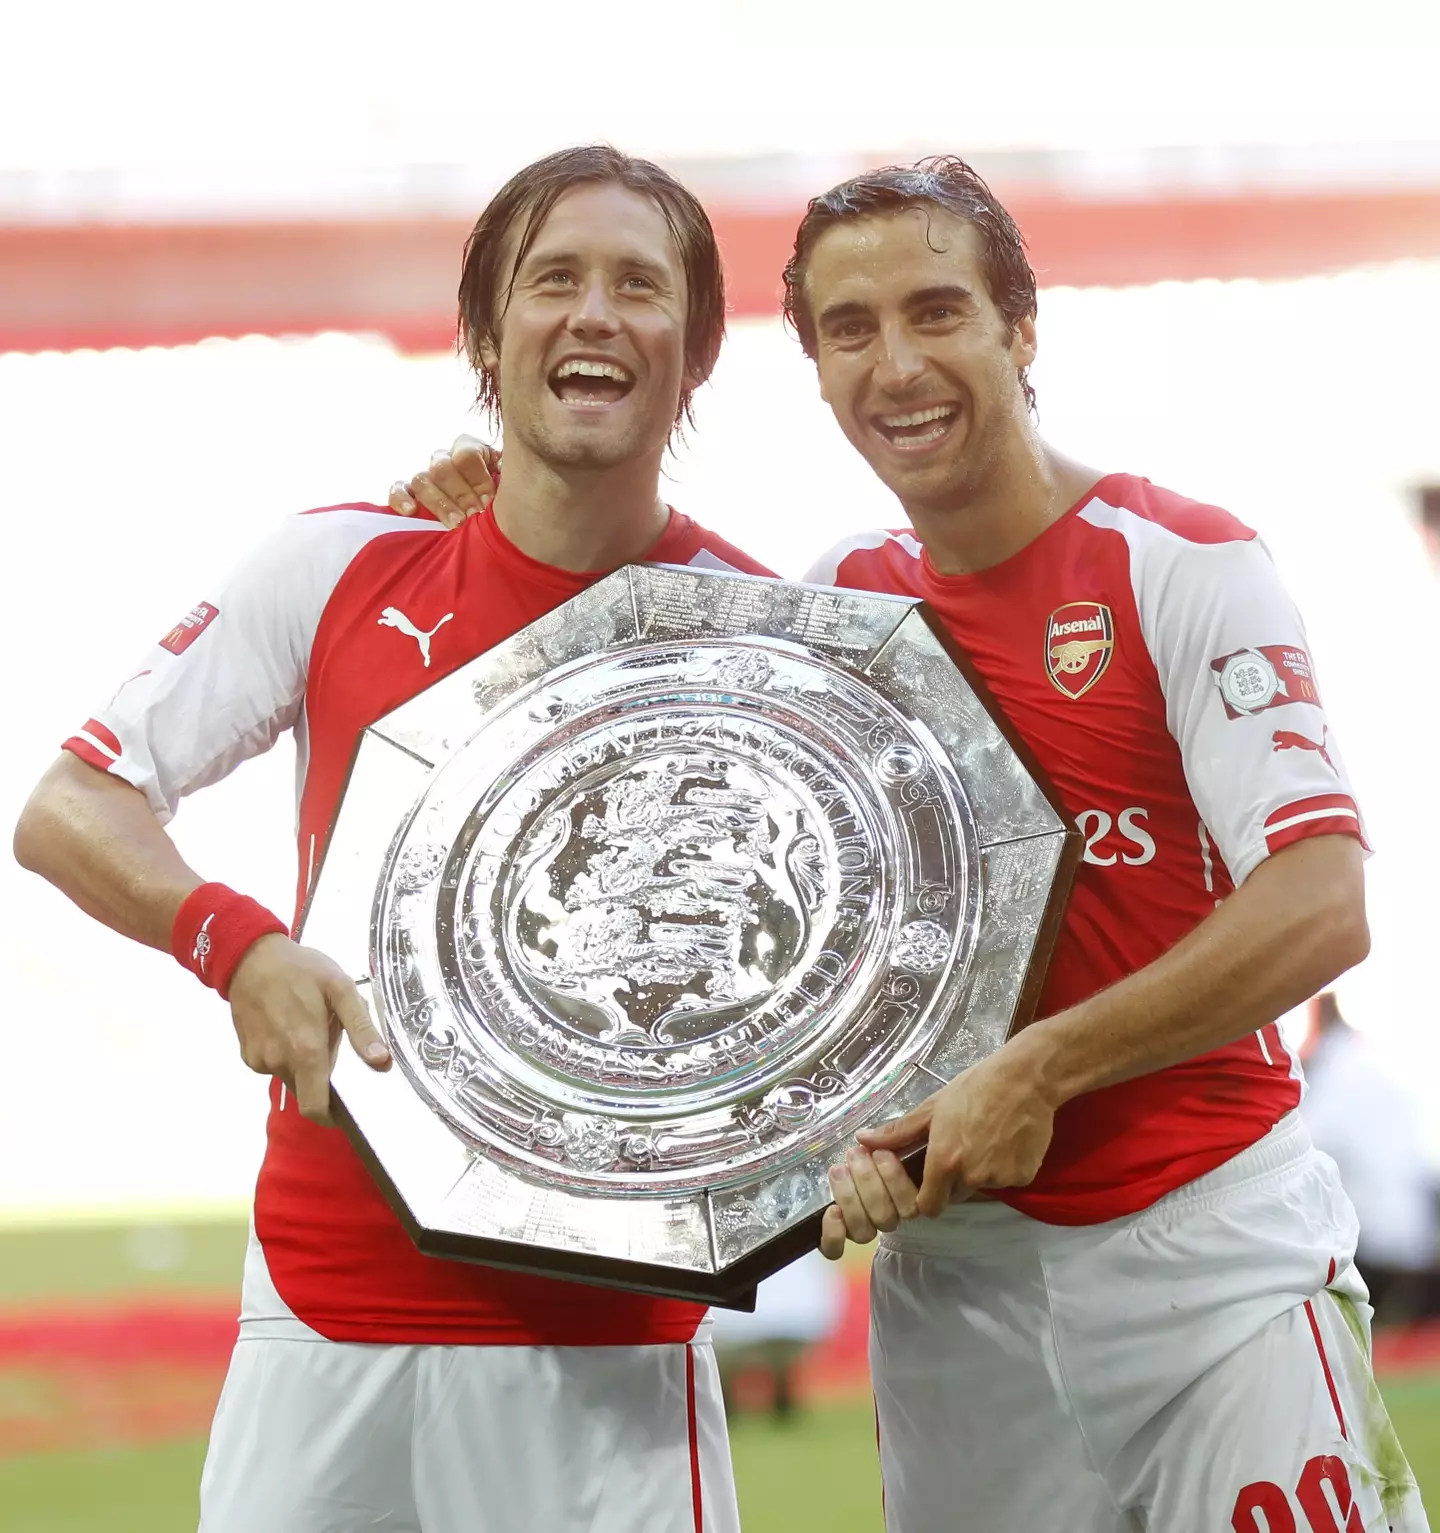 Mathieu Flamini is best known as midfielder for Arsenal.